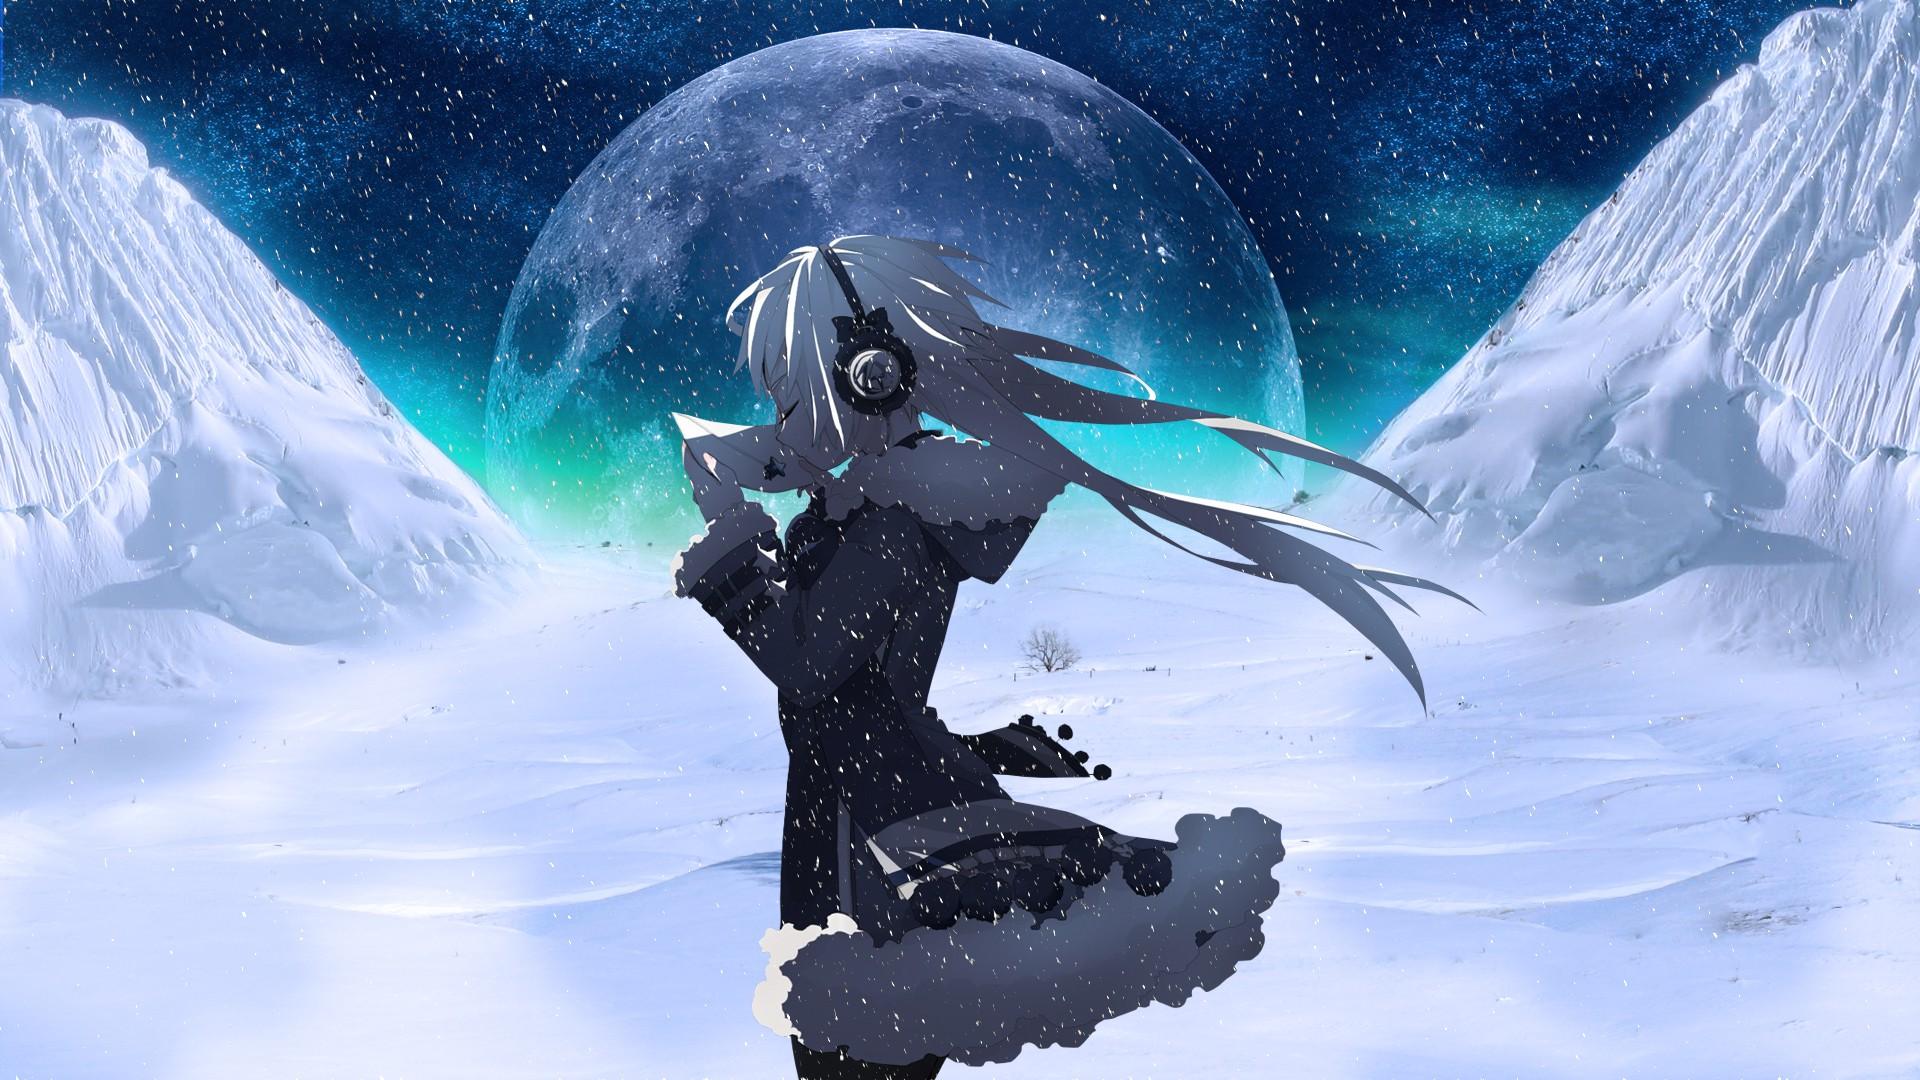 Download A Sad Anime Girl Alone in the Snow Wallpaper | Wallpapers.com